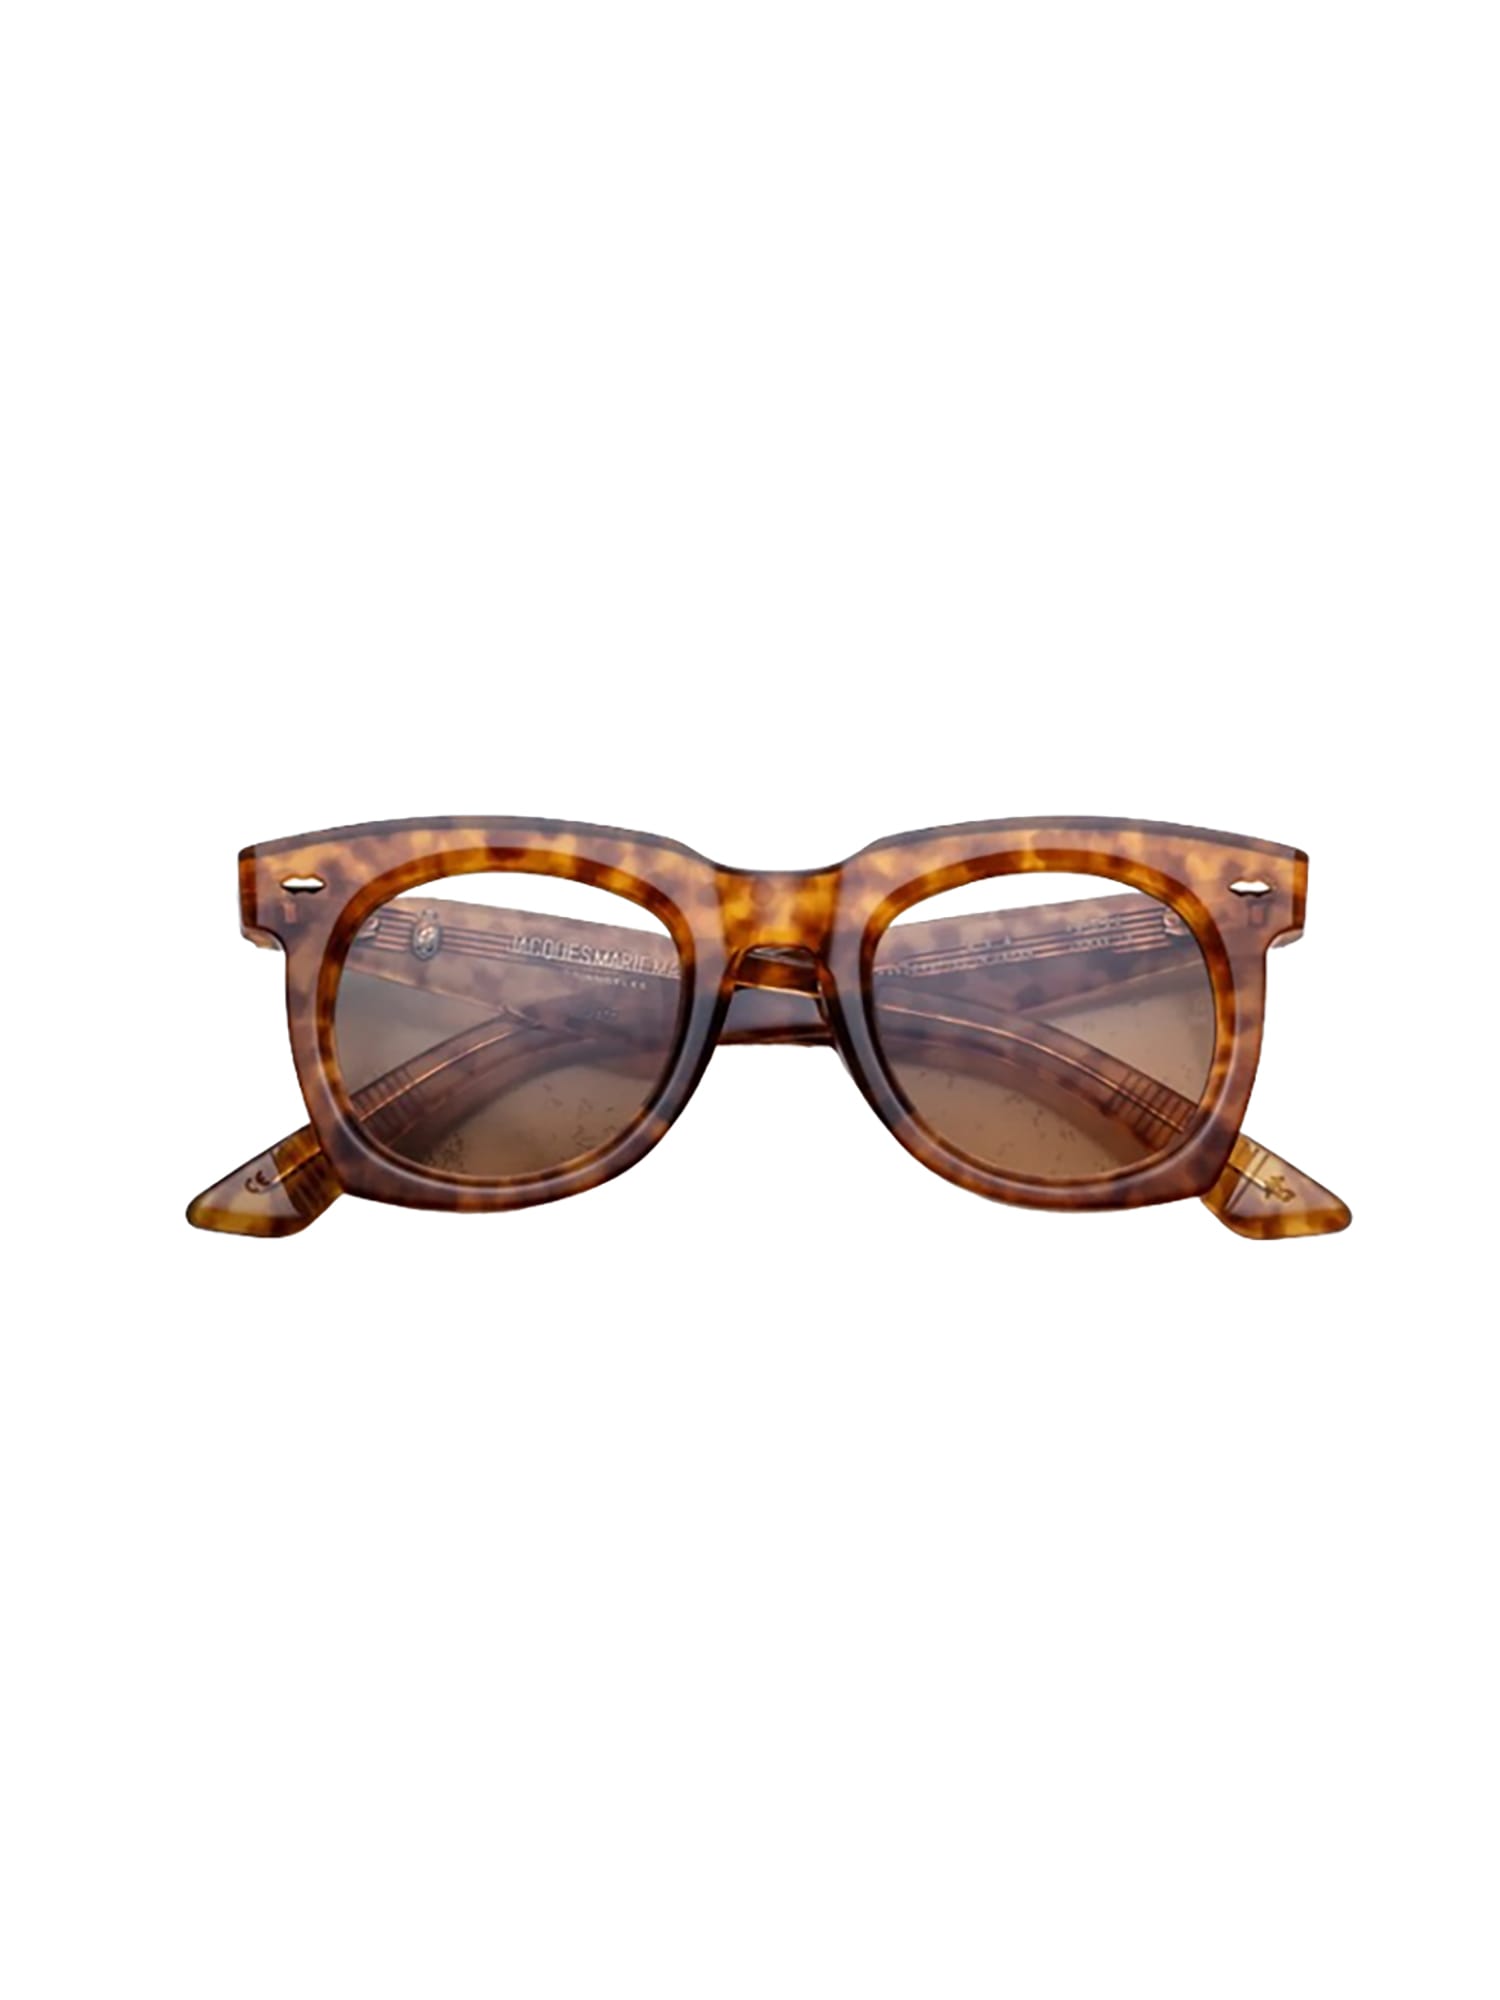 Jacques Marie Mage Ava Sunglasses In R Camel,sepia